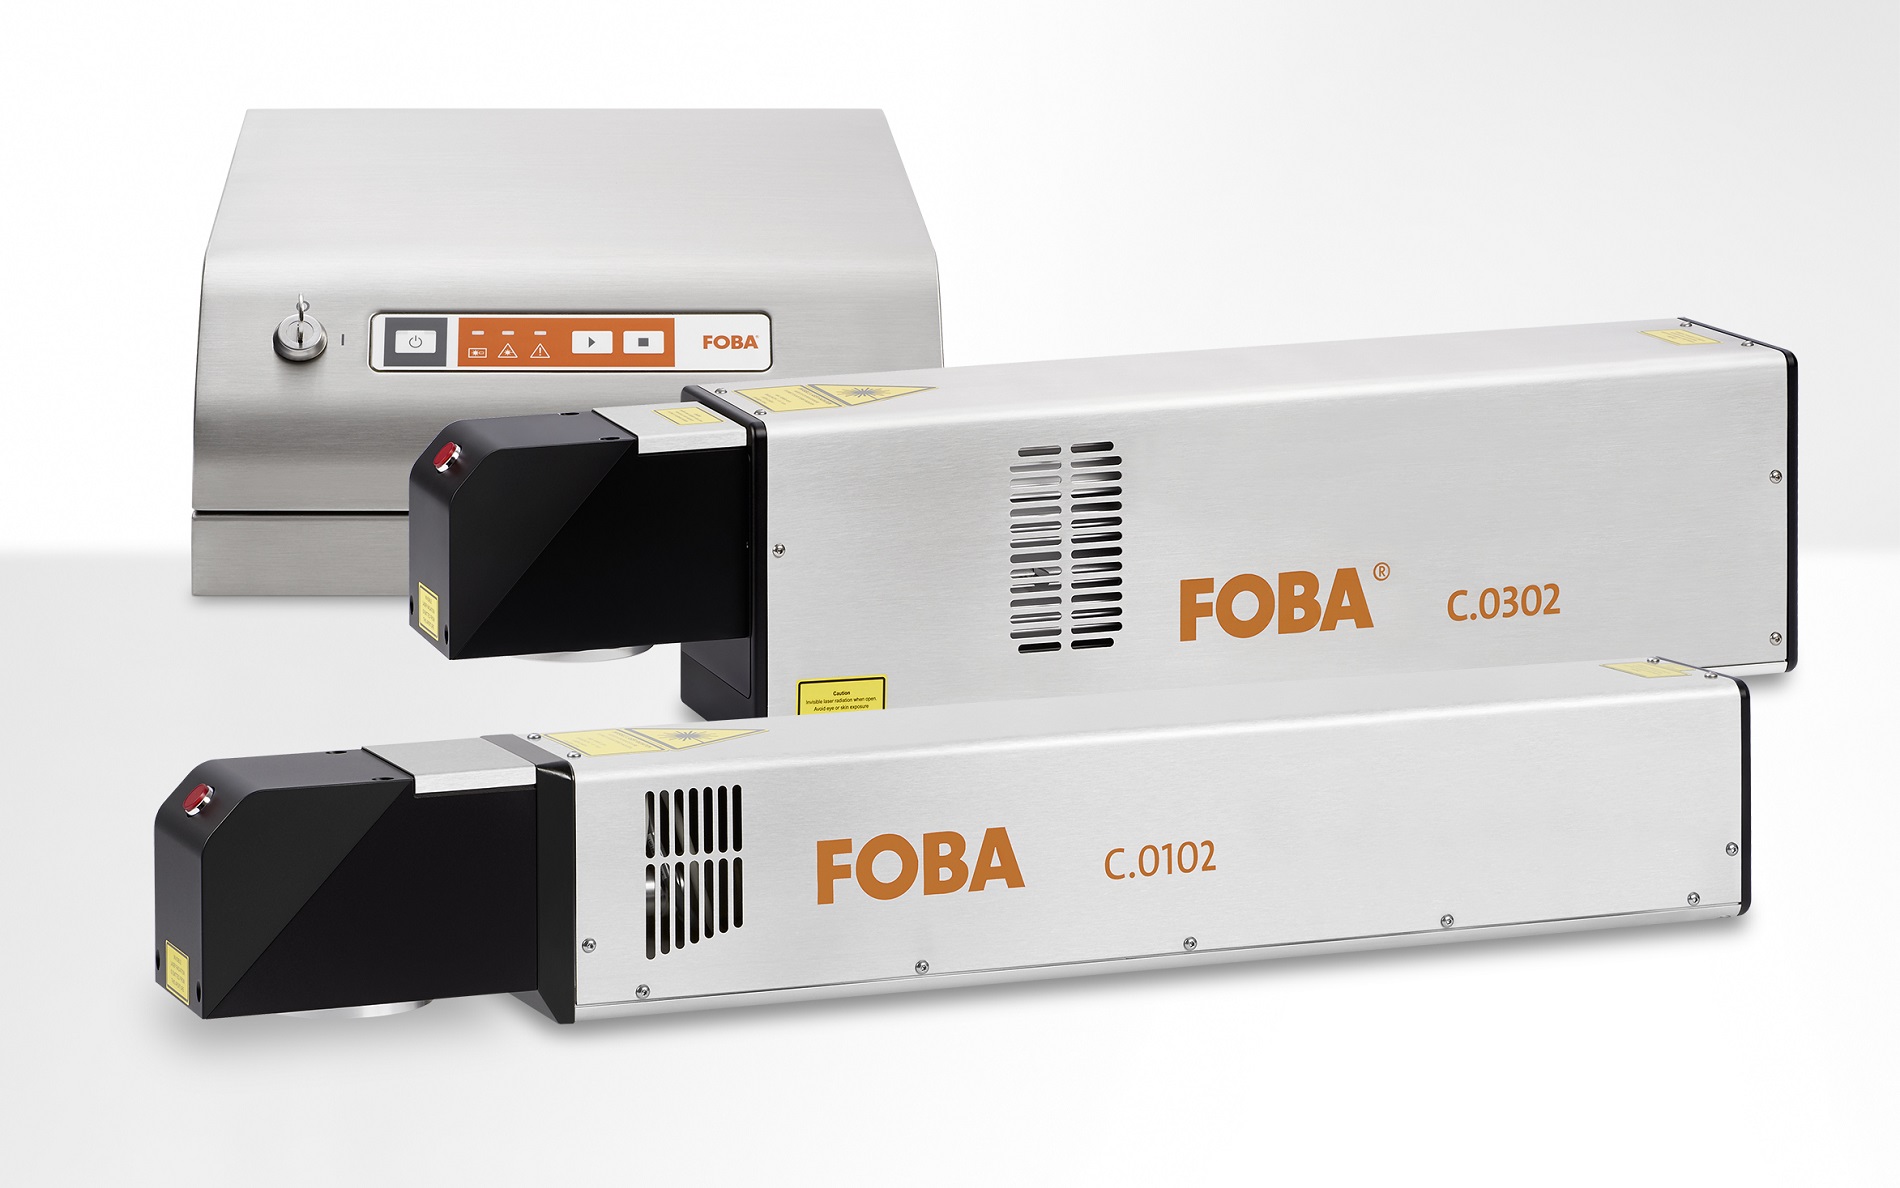 FOBA C.0102 and C.0302, 10- and 30-Watt-CO2-laser marking systems of the latest generation, offering a wide range of marking solutions for different materials and contents.